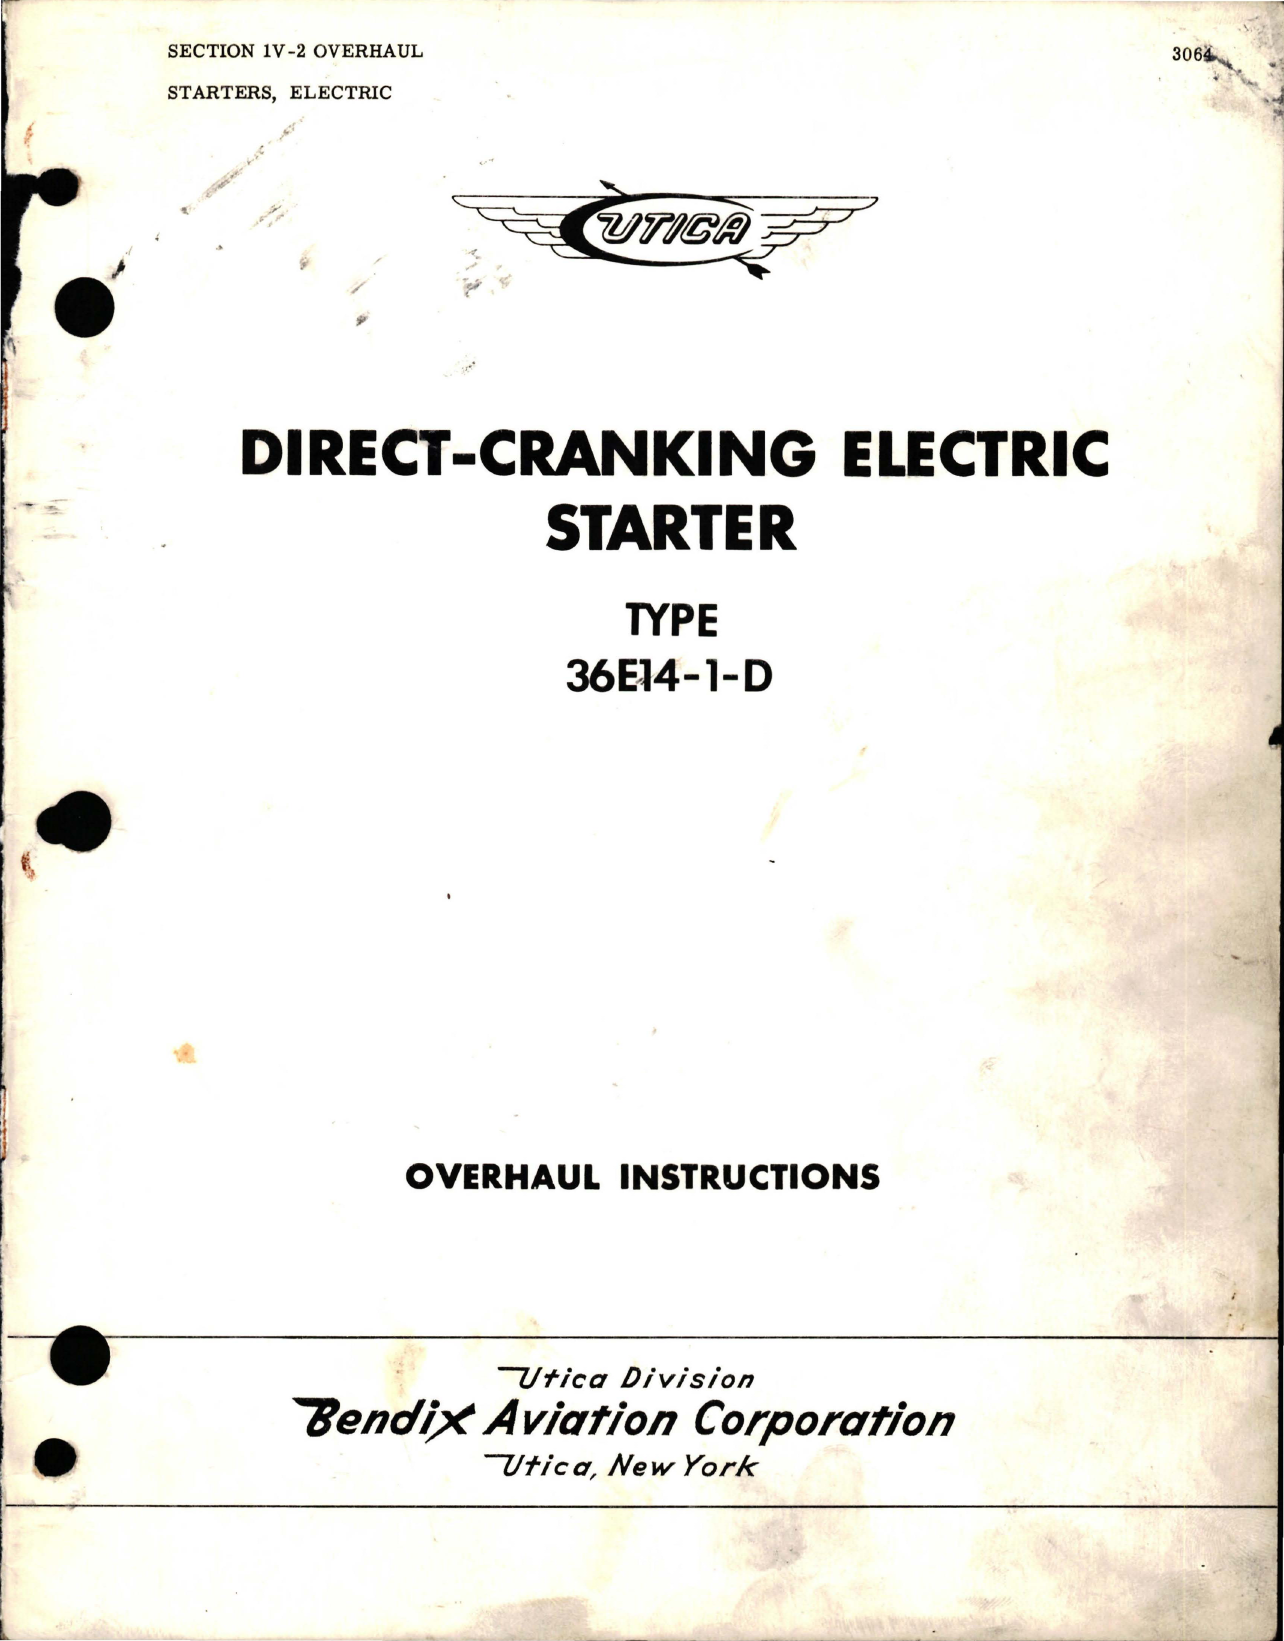 Sample page 1 from AirCorps Library document: Overhaul Instructions for Direct-Cranking Electric Starter - Type 36E14-1-D